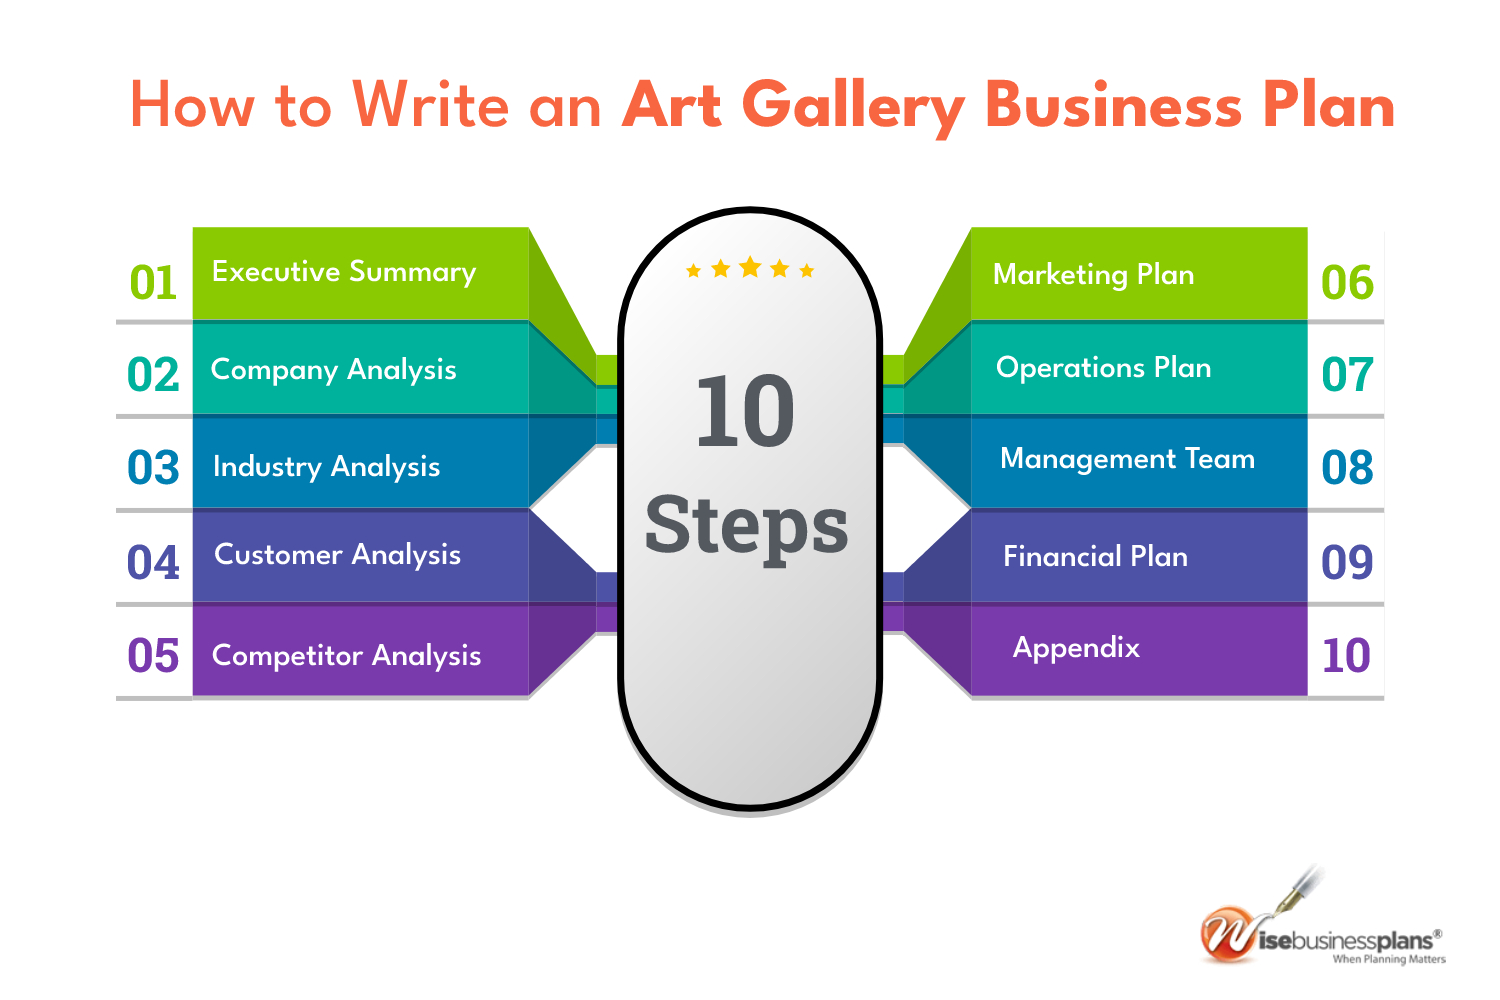 How to write an art gallery business plan